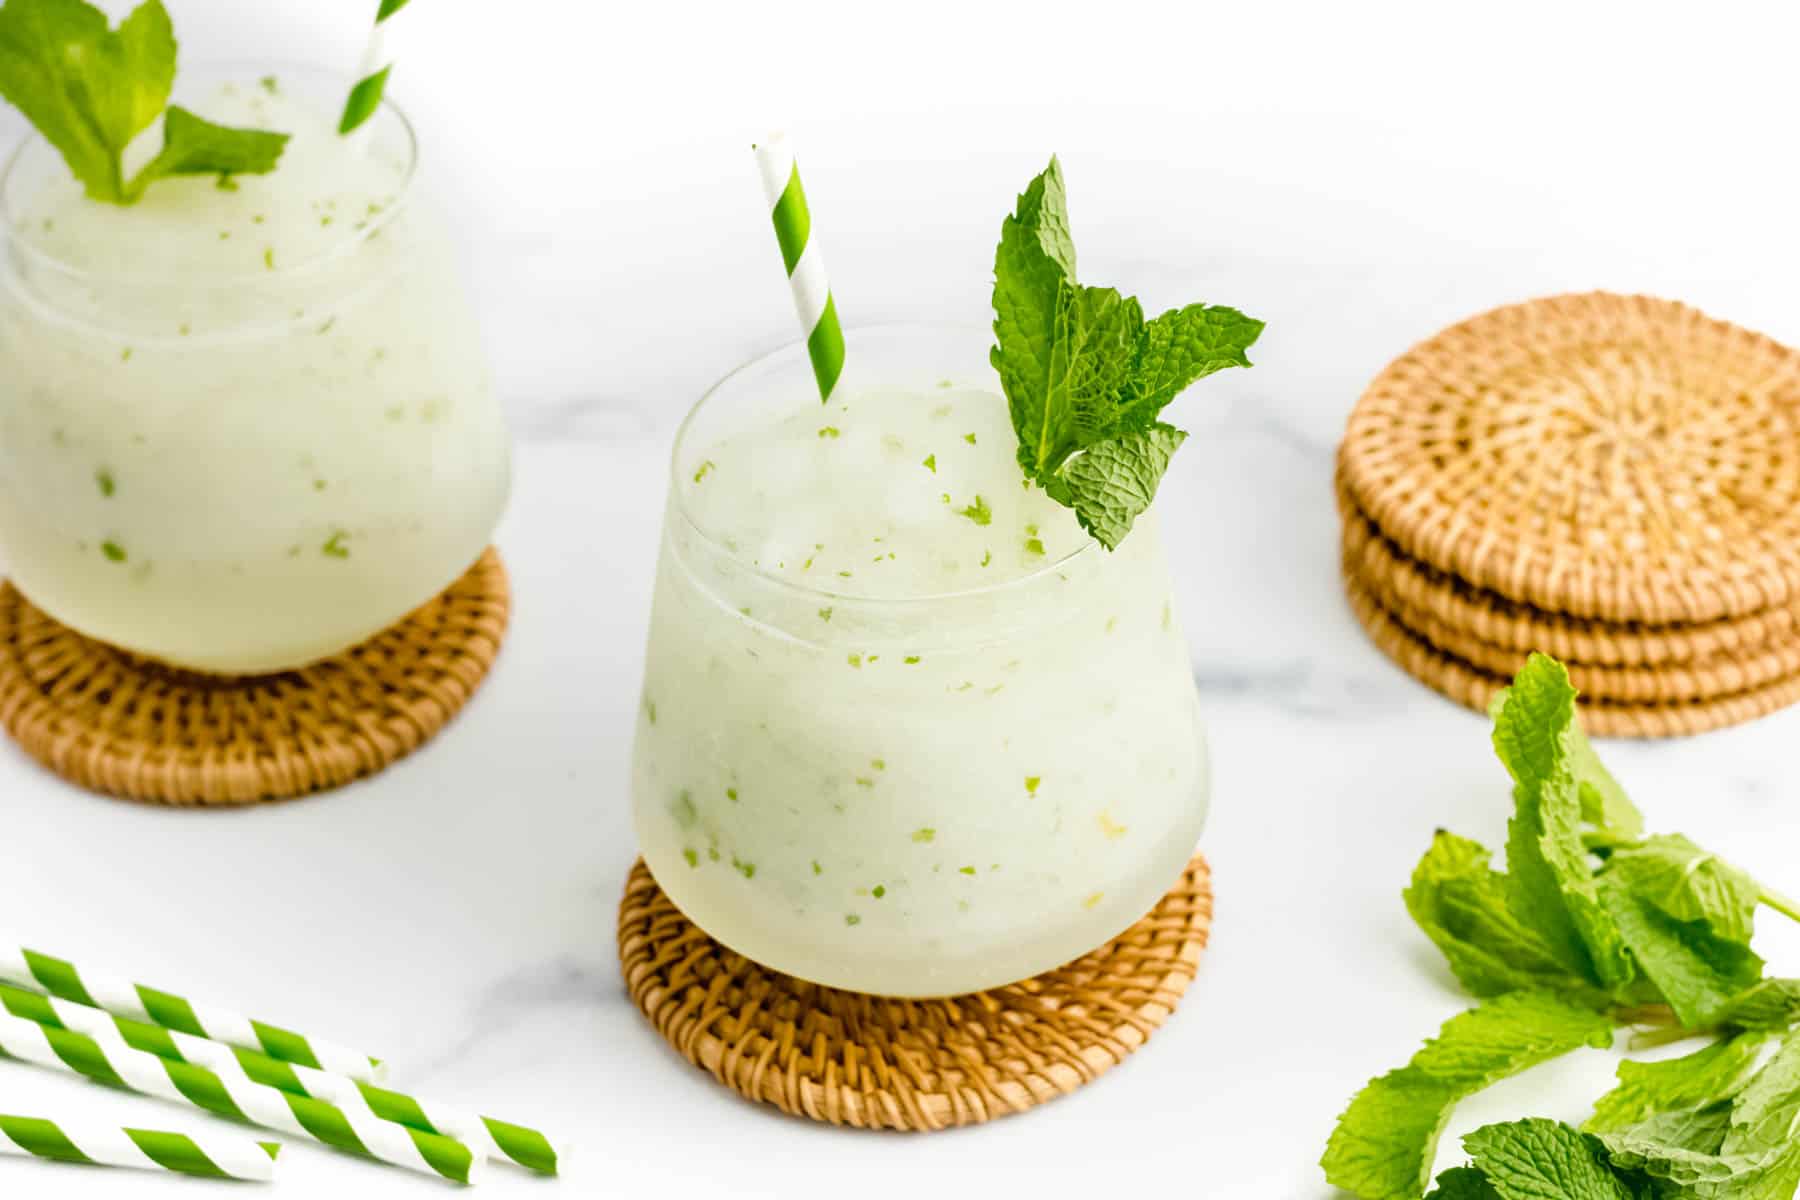 Frozen Mojitos alongside herb sprigs and green and white striped straws.